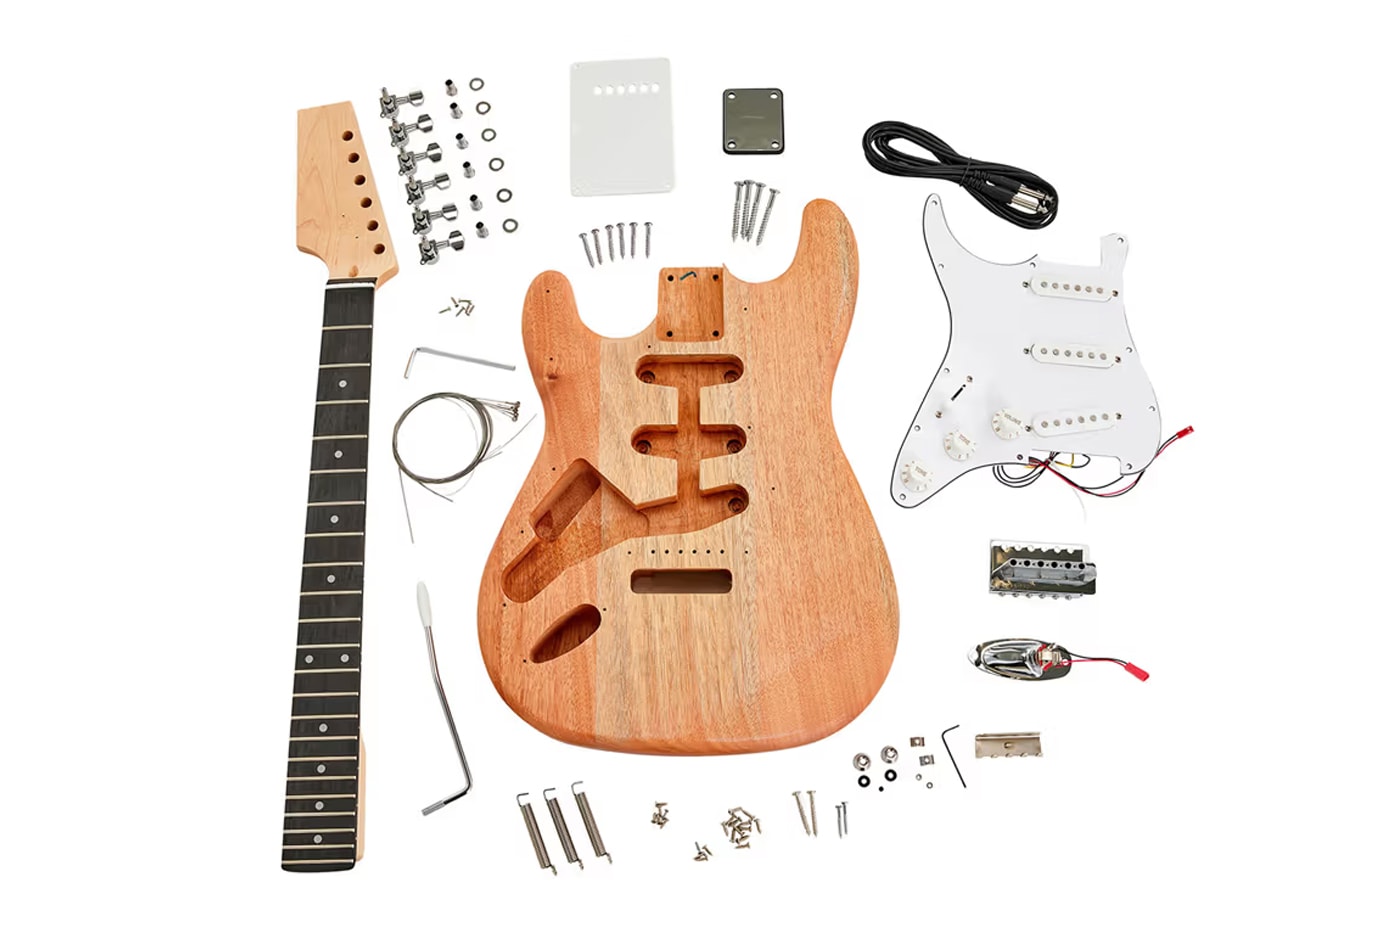 Harley Benton DIY Wooden Guitar Kits launch details bass electric acoustic fretboard specs tech build your own musical instrument